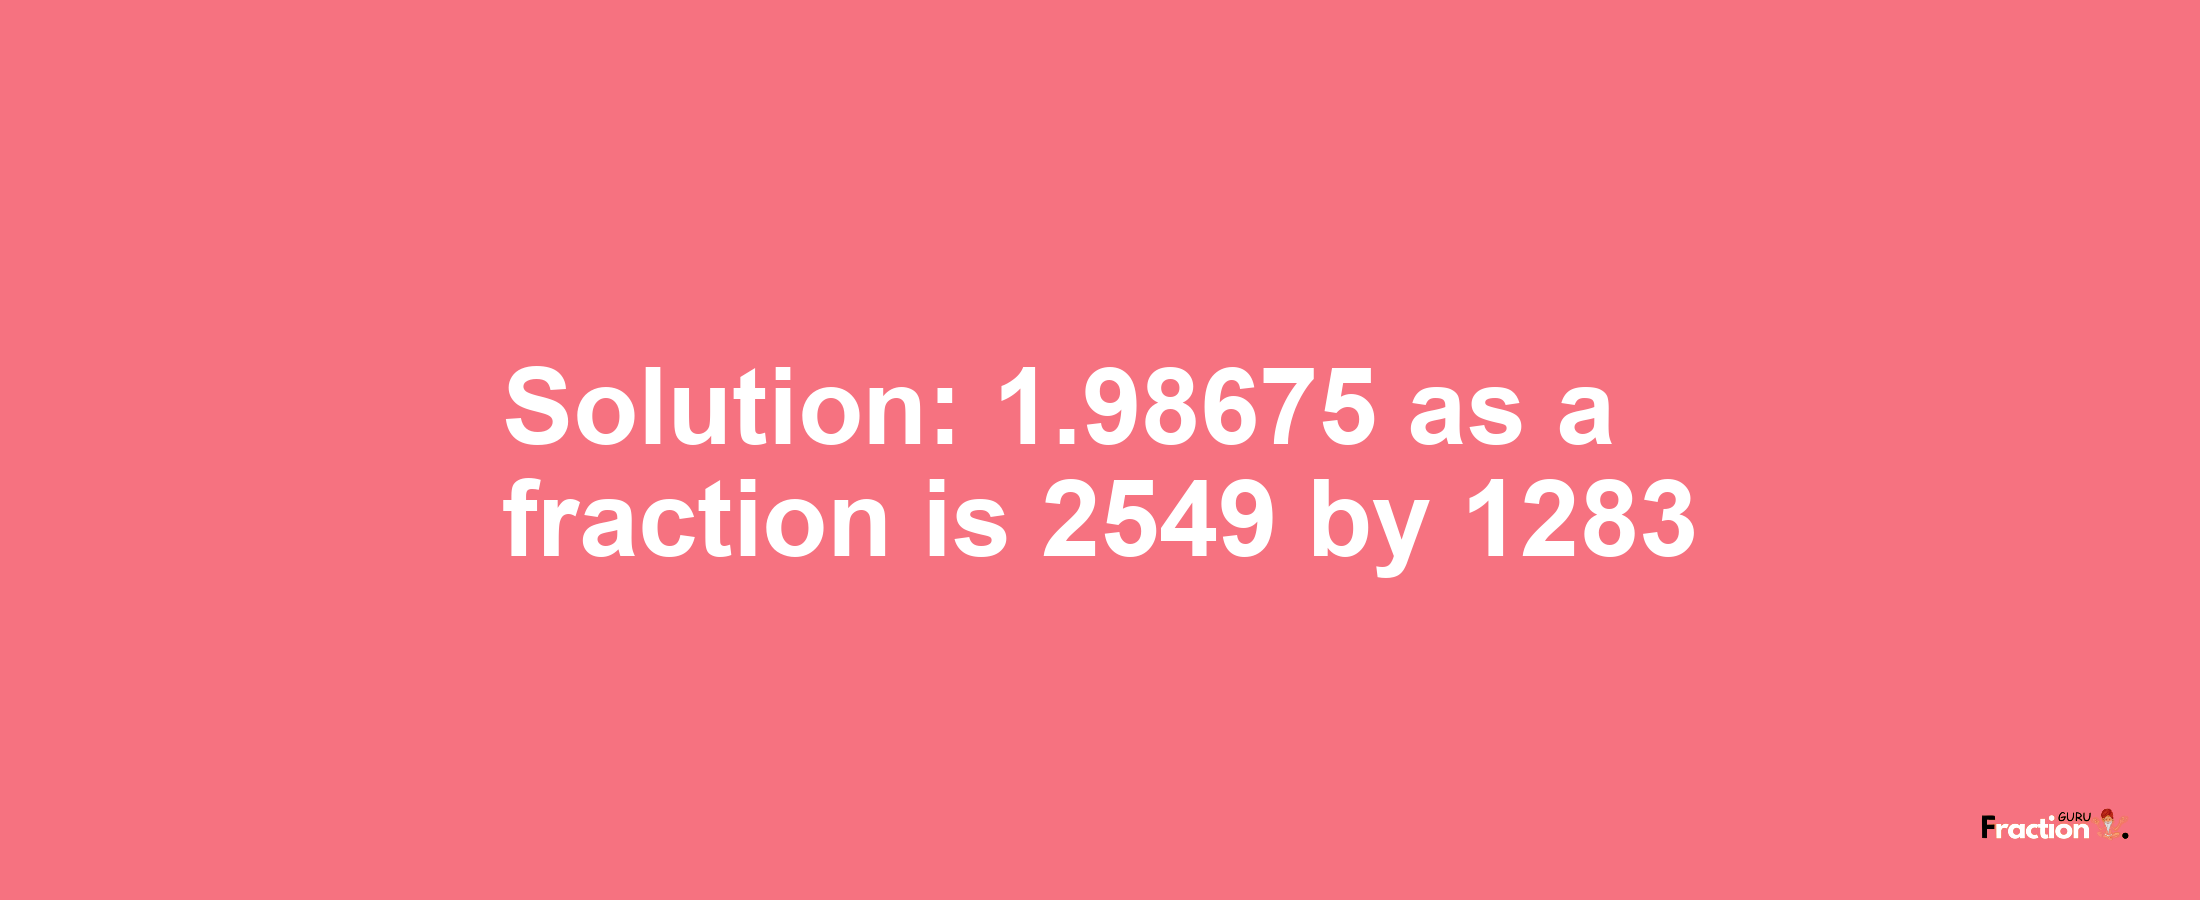 Solution:1.98675 as a fraction is 2549/1283